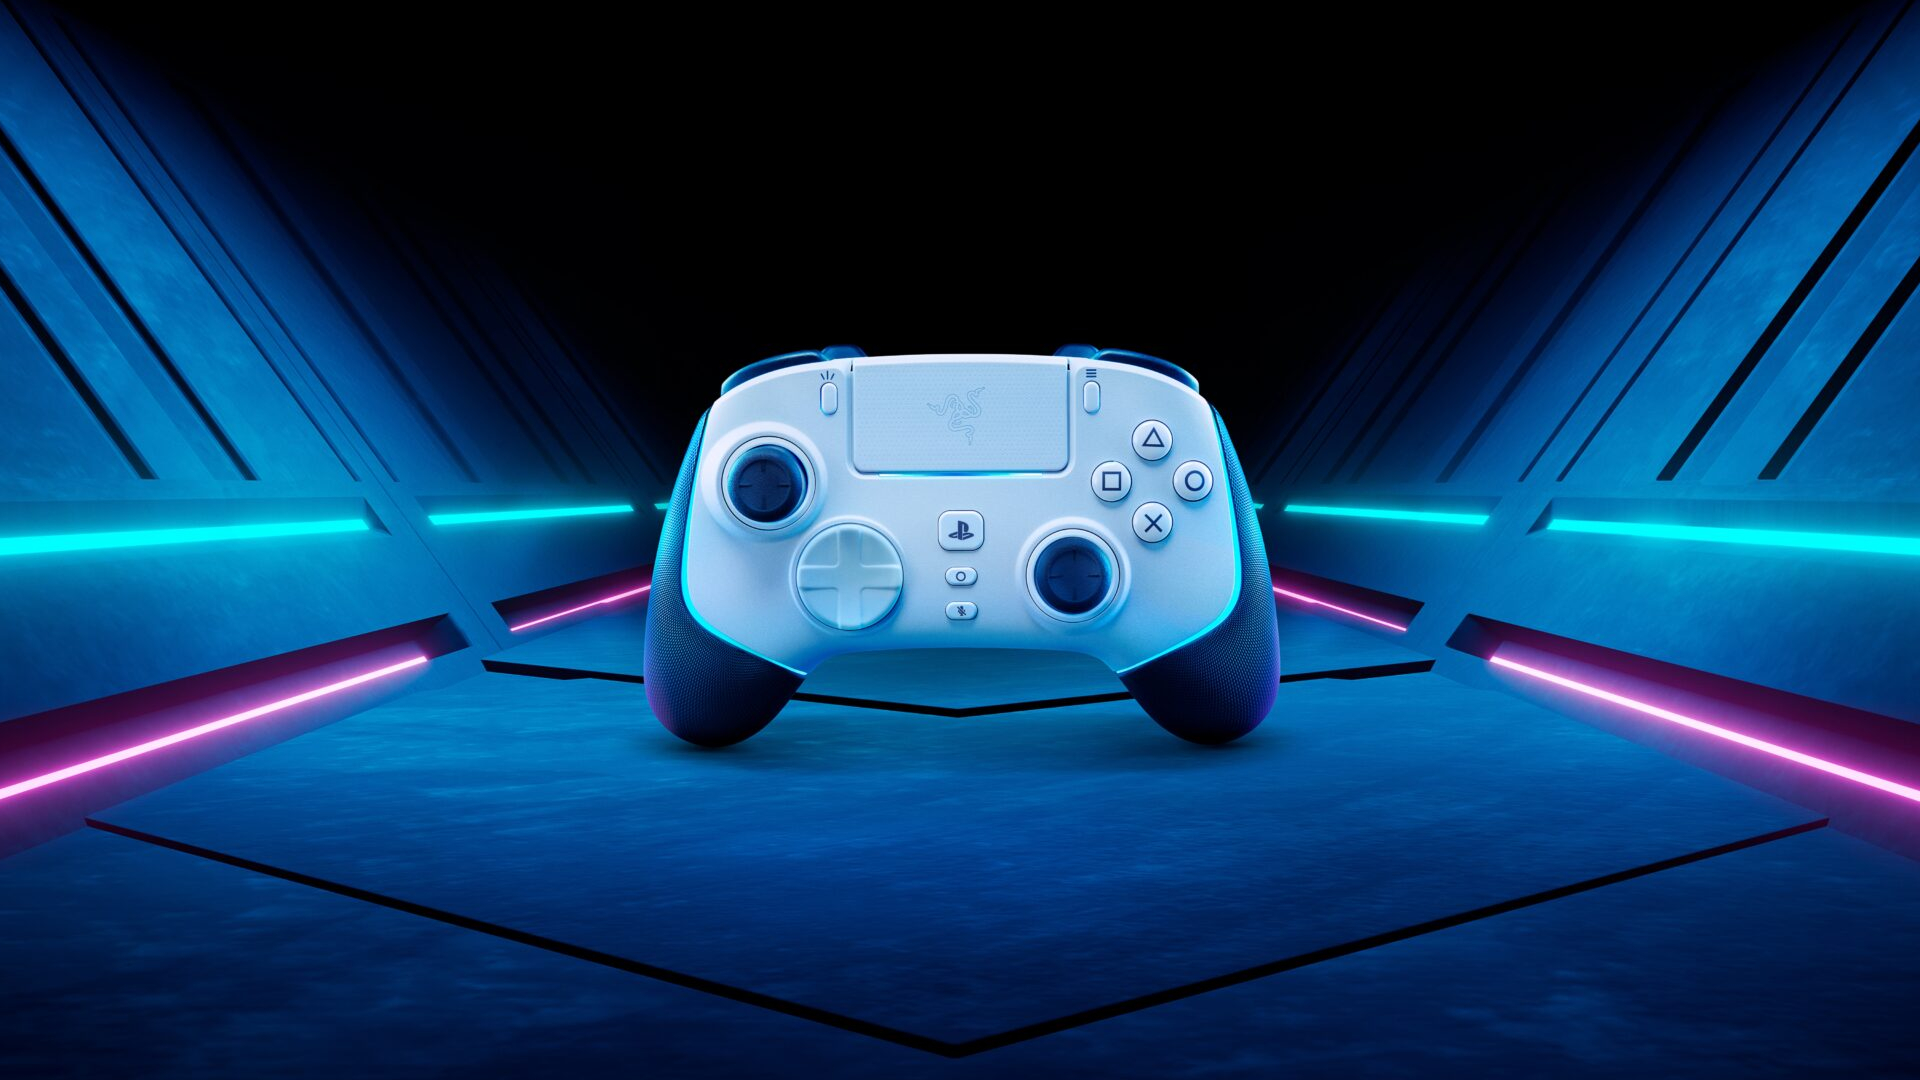 Rumour: Sony to Announce a Premium Pro Controller for PS5